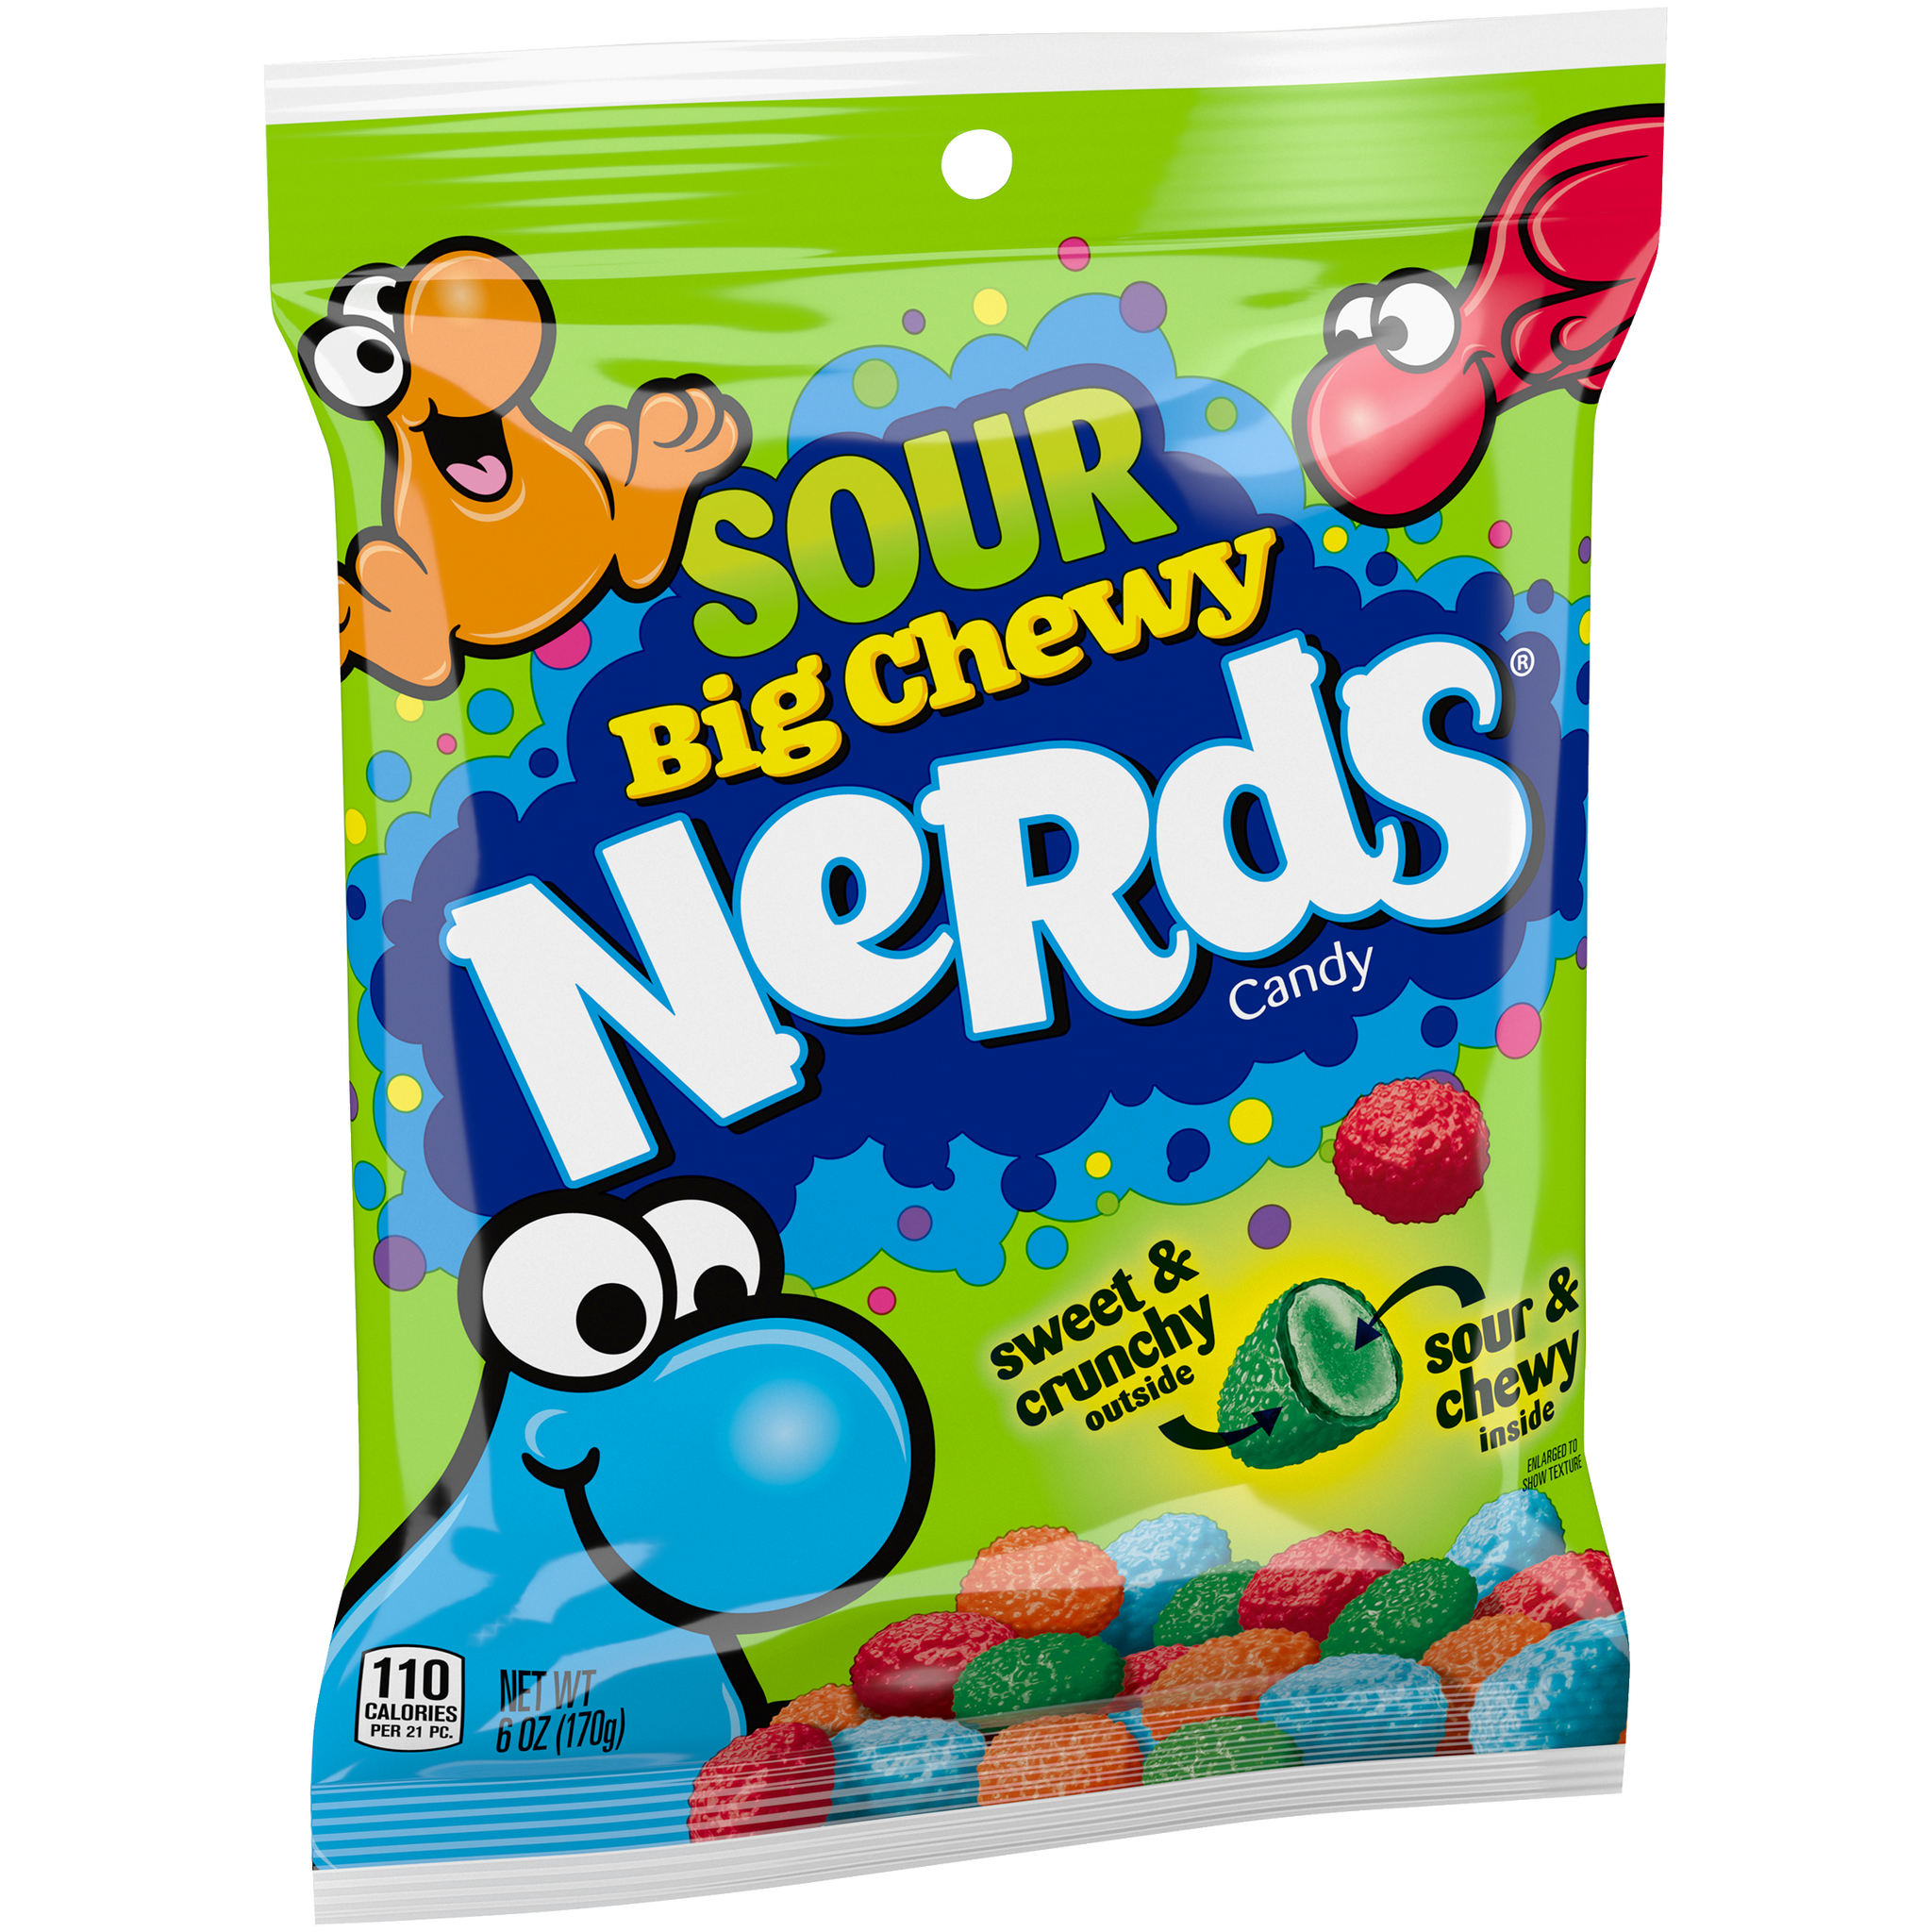 Nerds Candy Variety pack of 3 candies (Gummy Clusters, Big Chewy